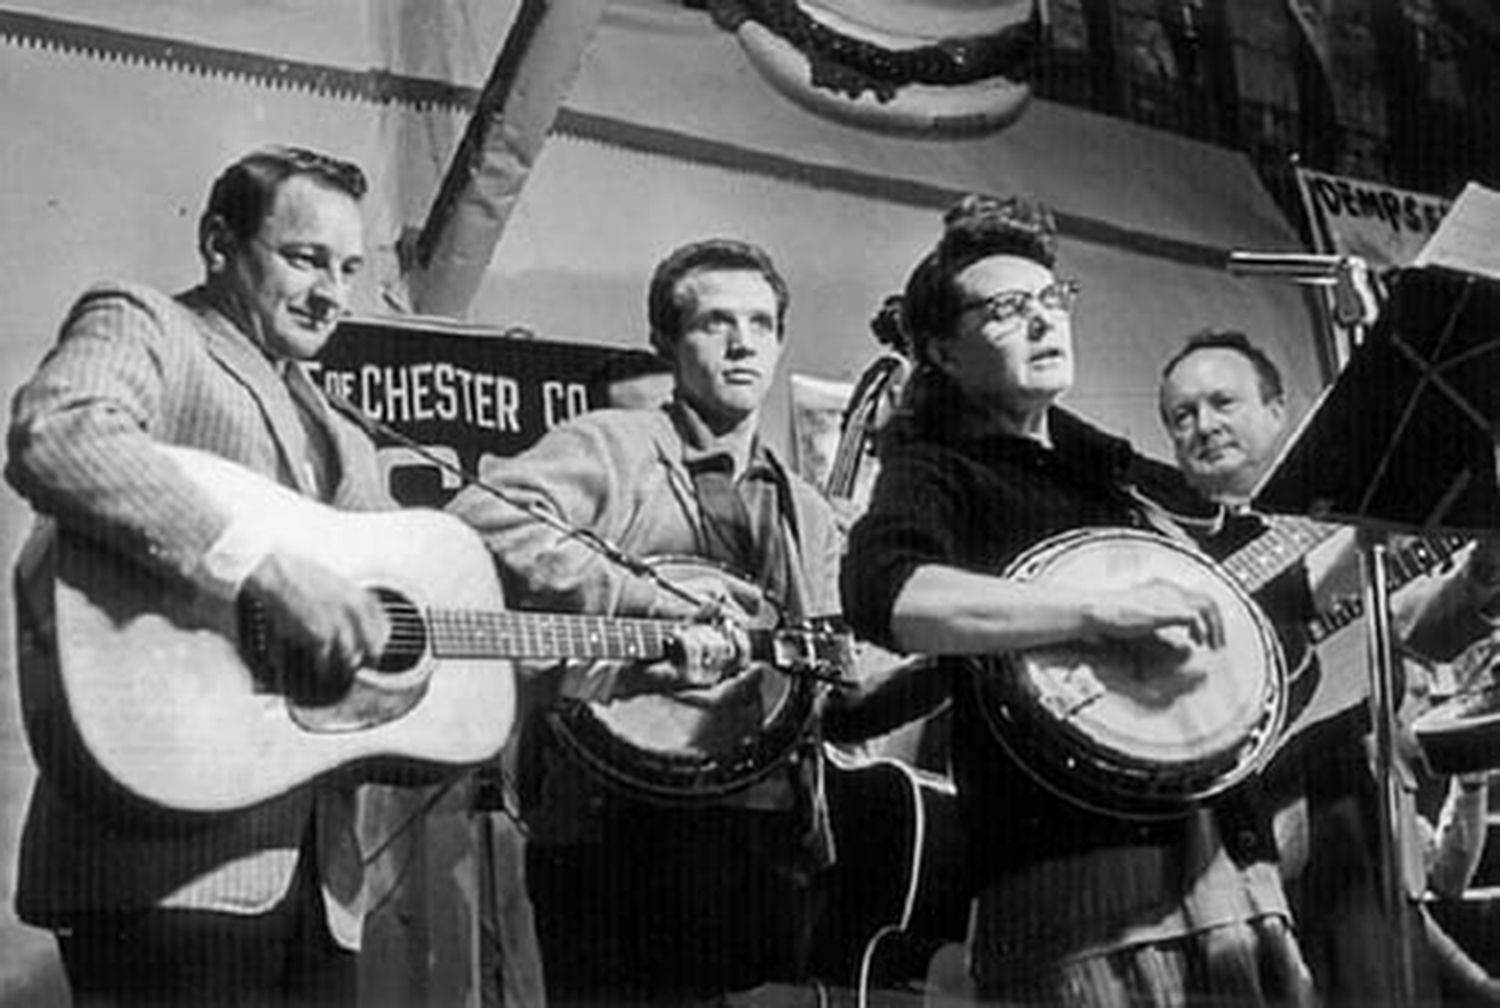 In an old black and white television image, a group of musicians play instruments